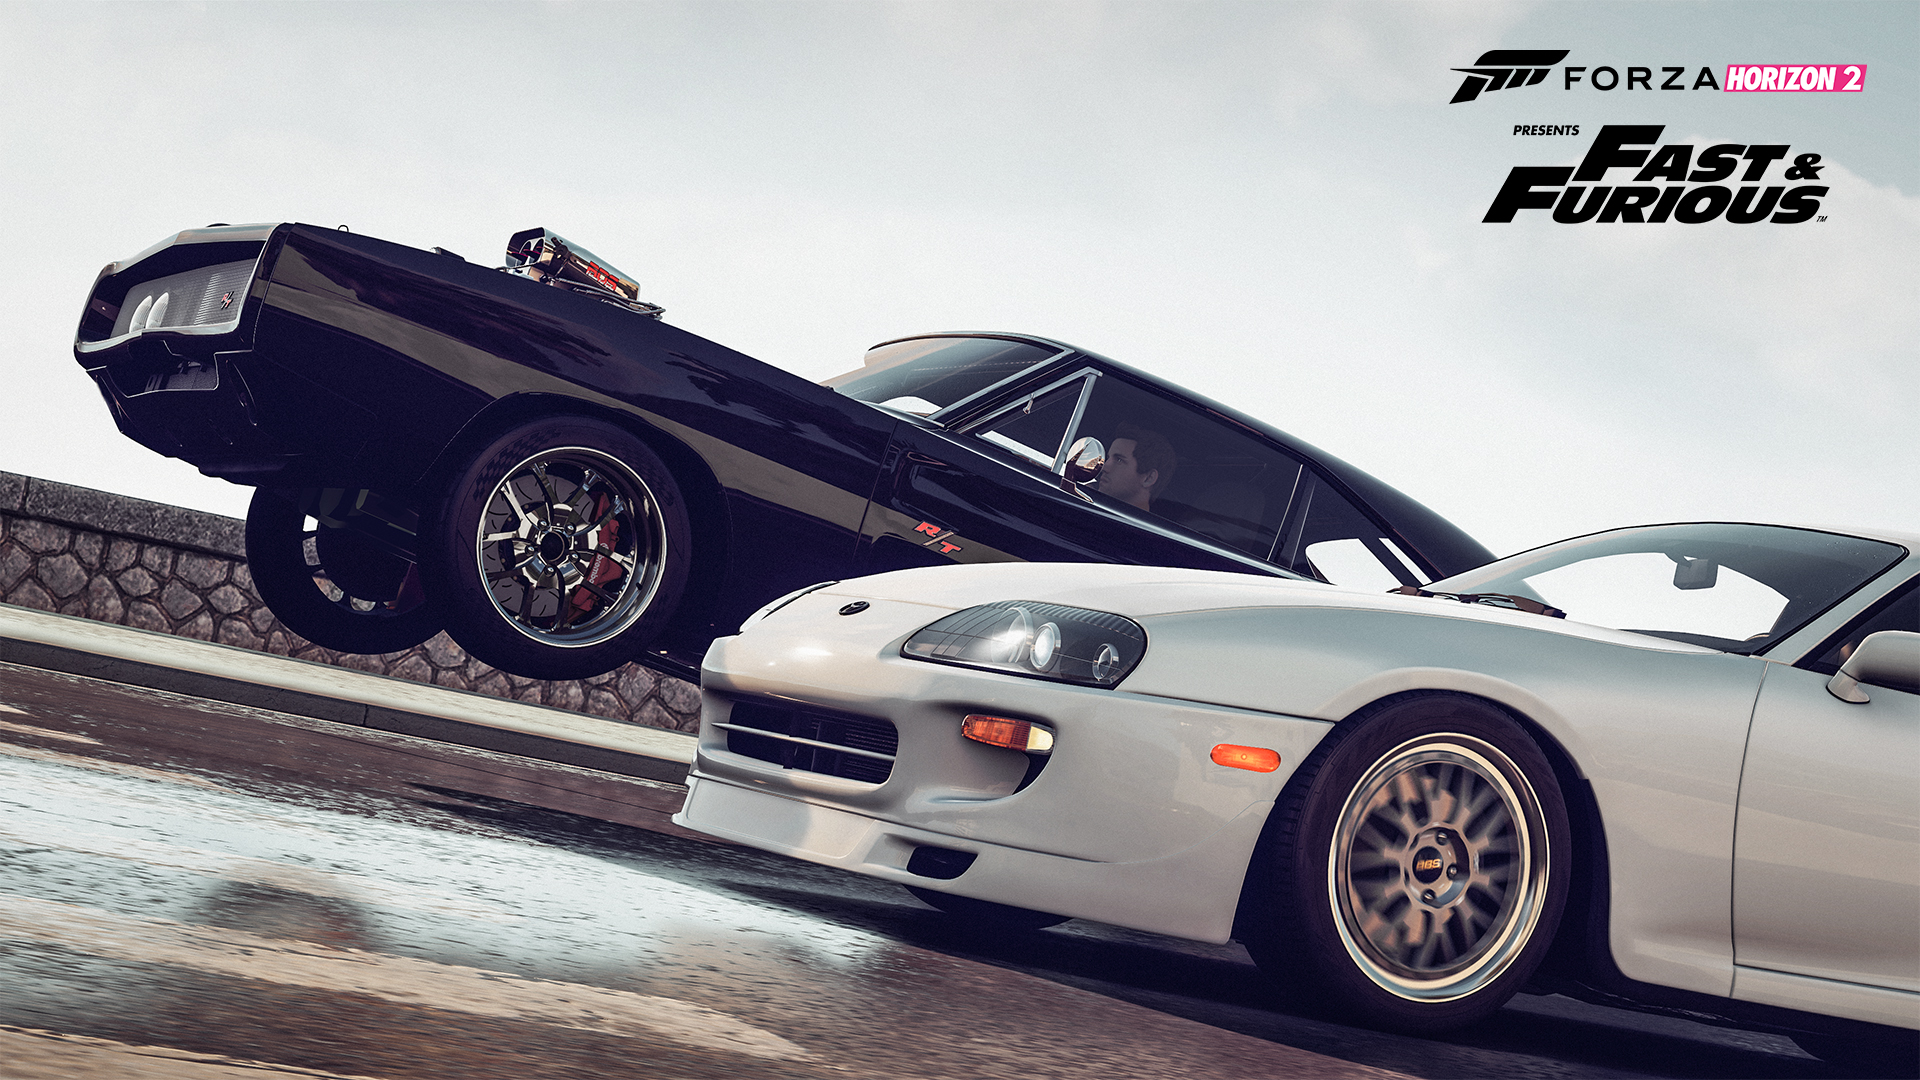 Forza Horizon 2 Video Games Fast And Furious Car Dodge Charger Toyota Supra American Cars Muscle Car 1920x1080